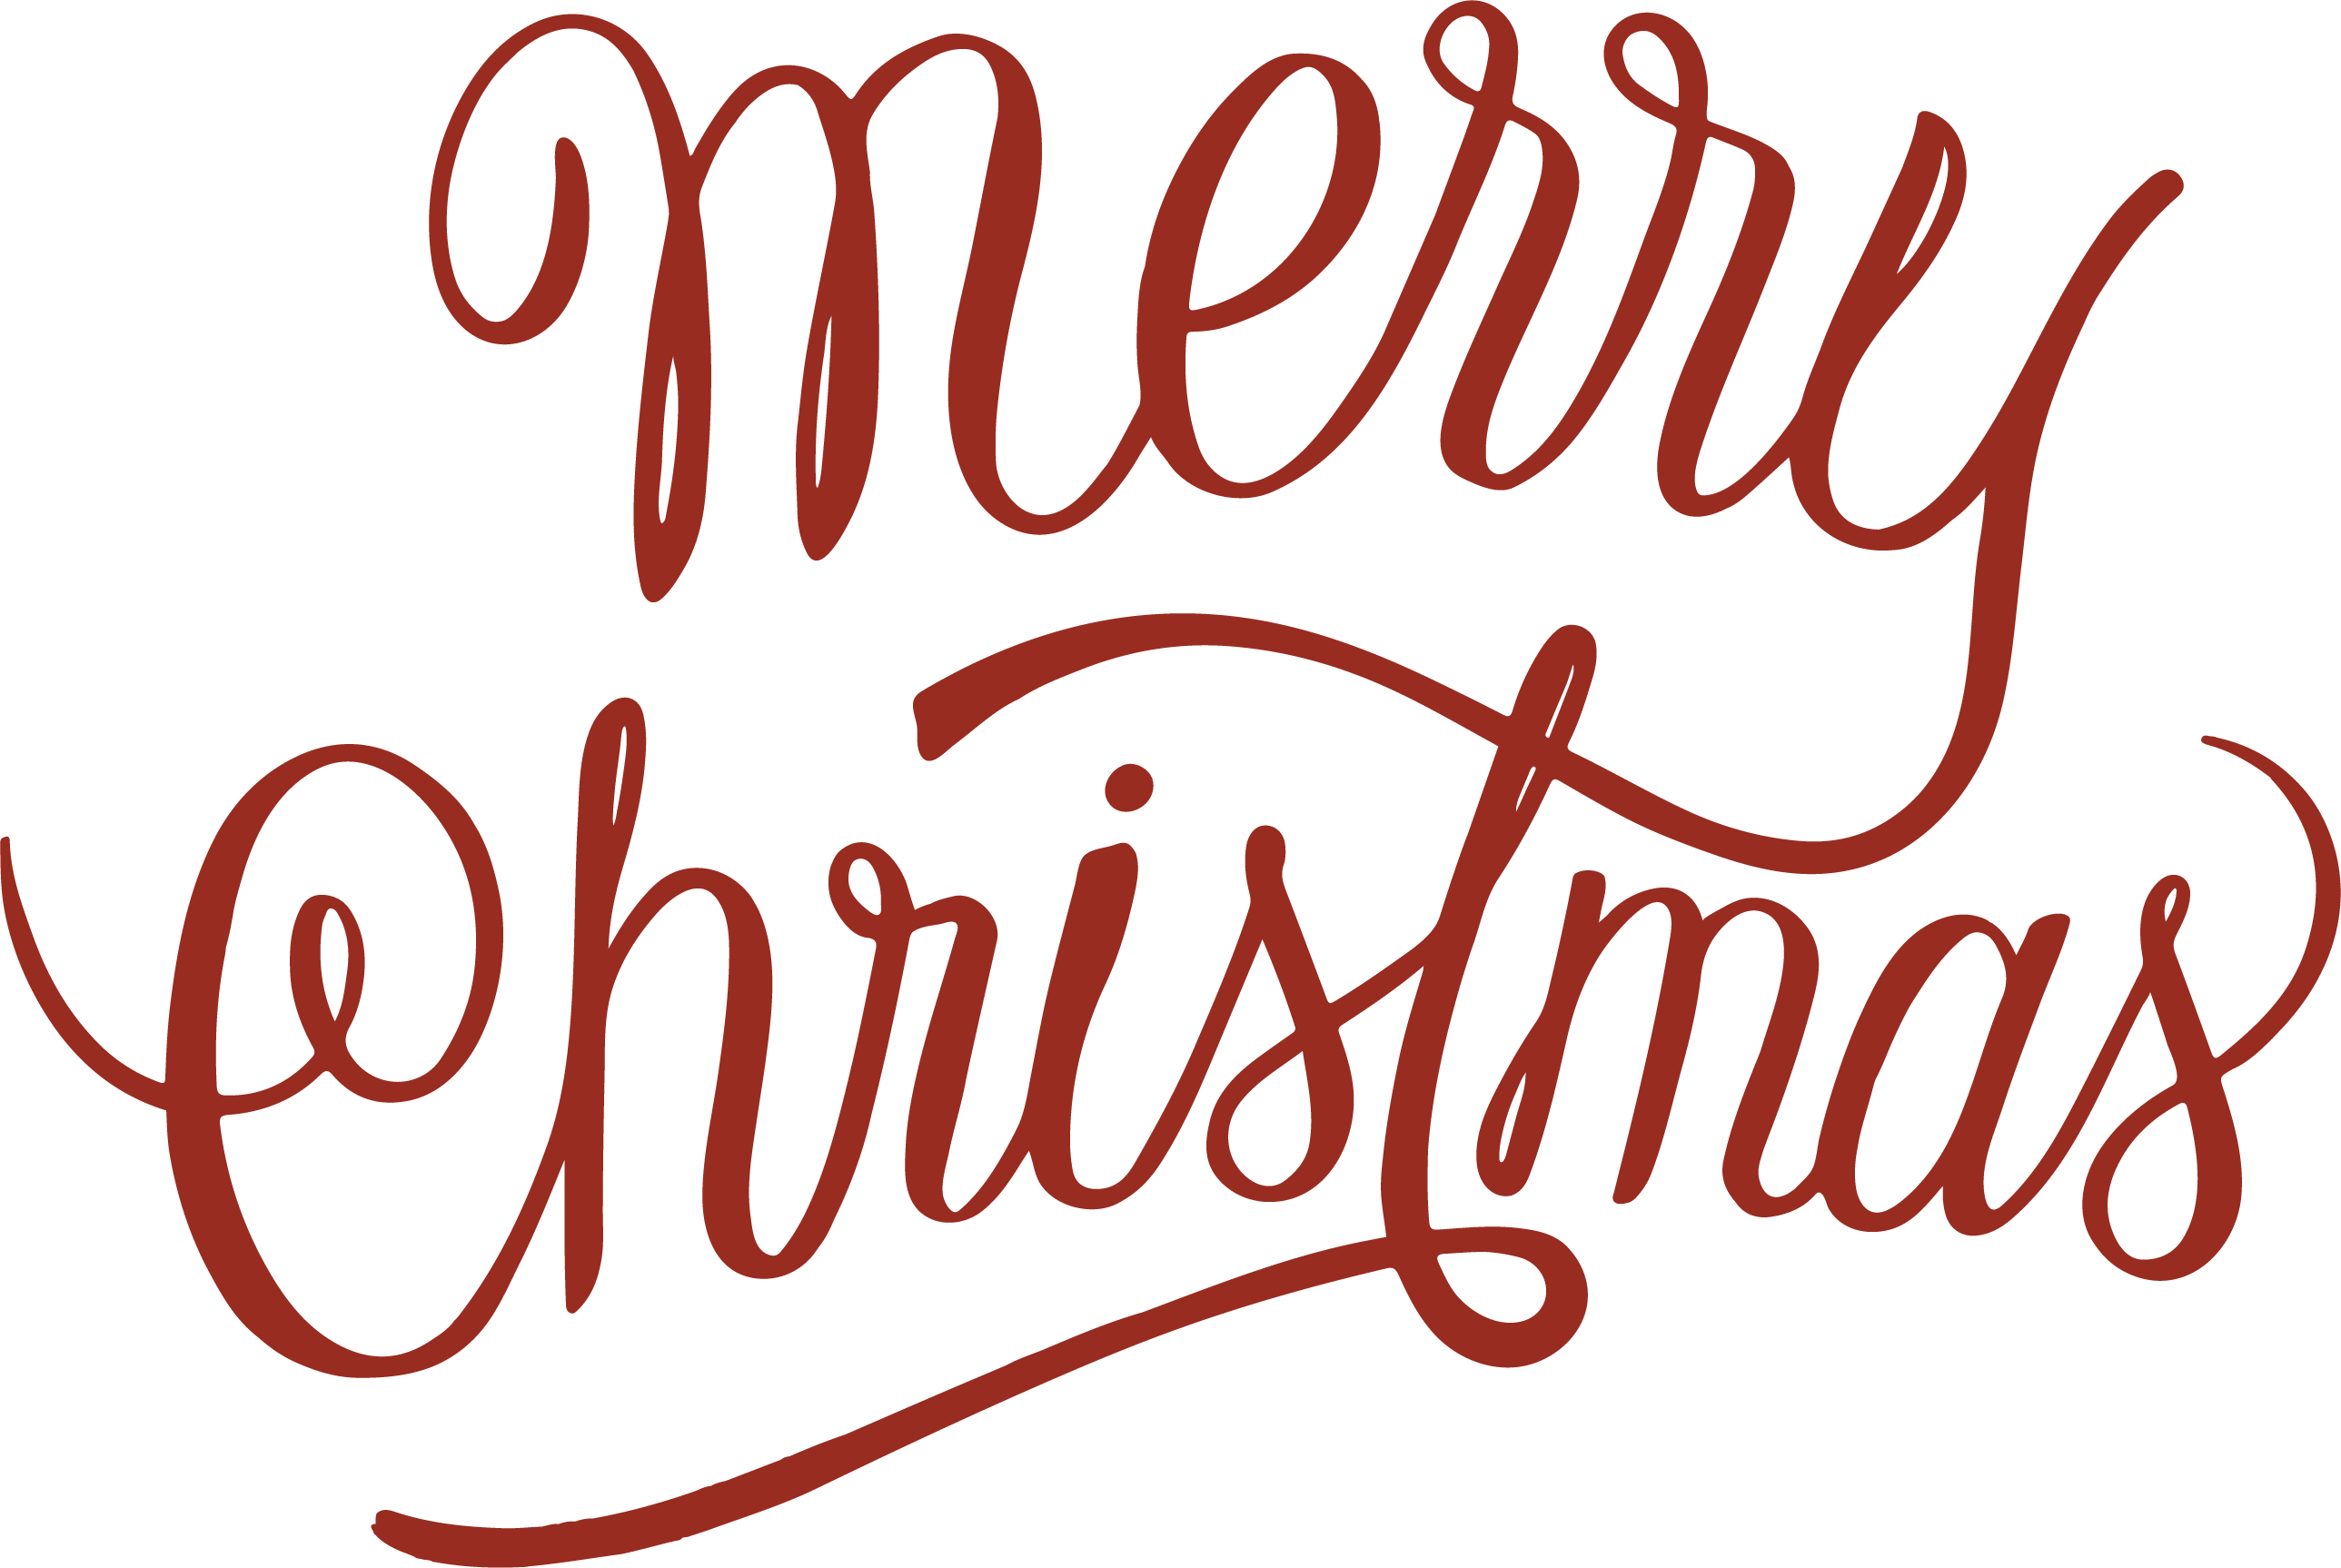 Merry Christmas PNG Image | OngPng